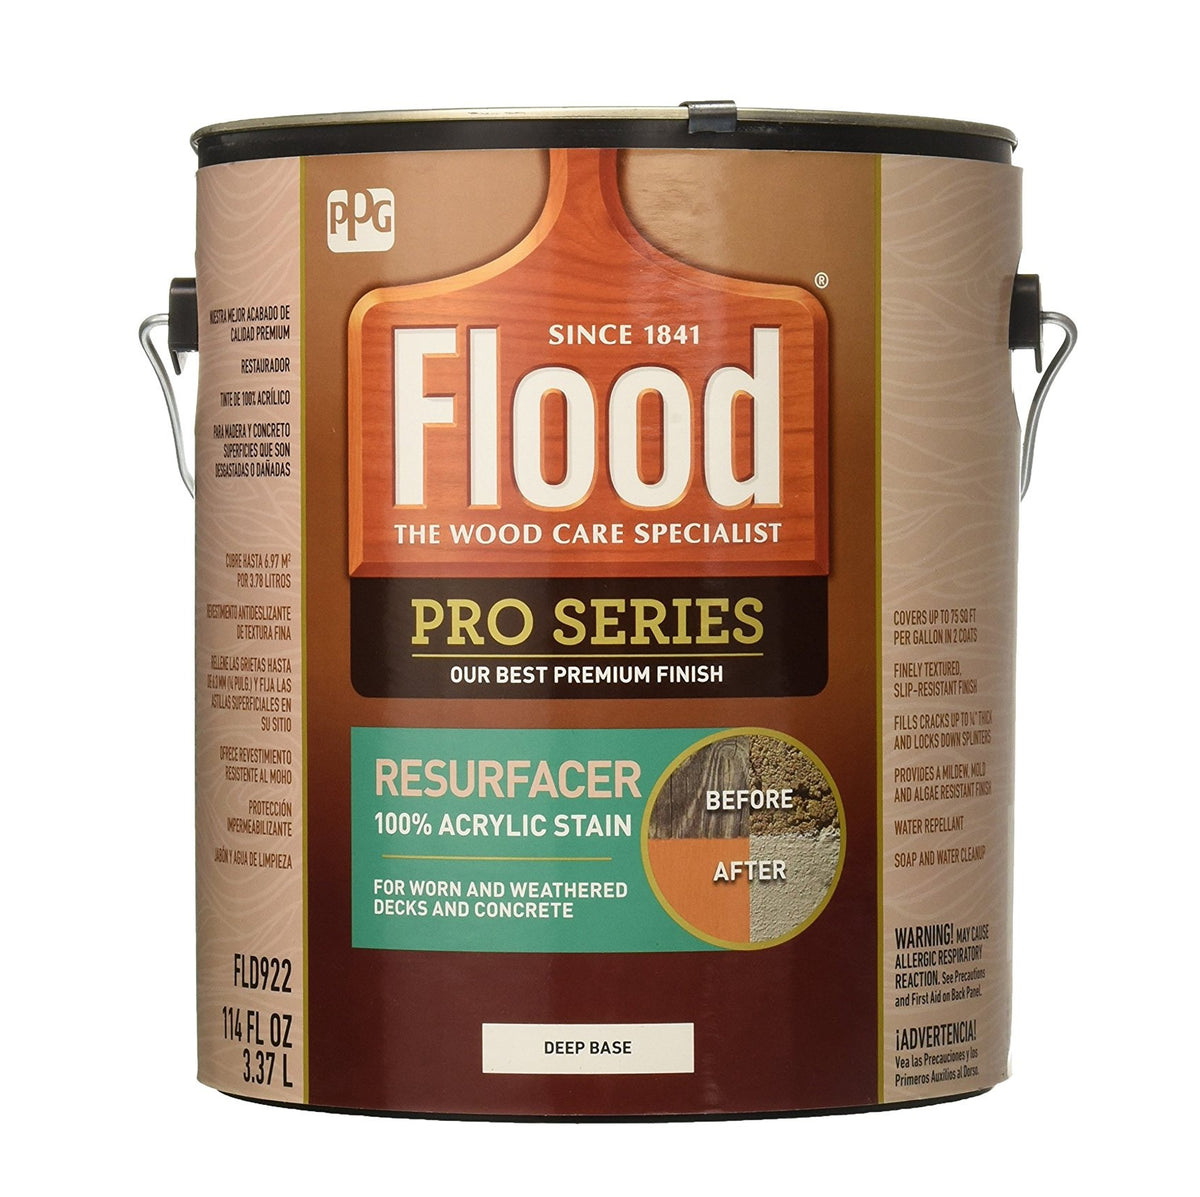 Buy flood pro series resurfacer - Online store for stain, wood protector finishes in USA, on sale, low price, discount deals, coupon code